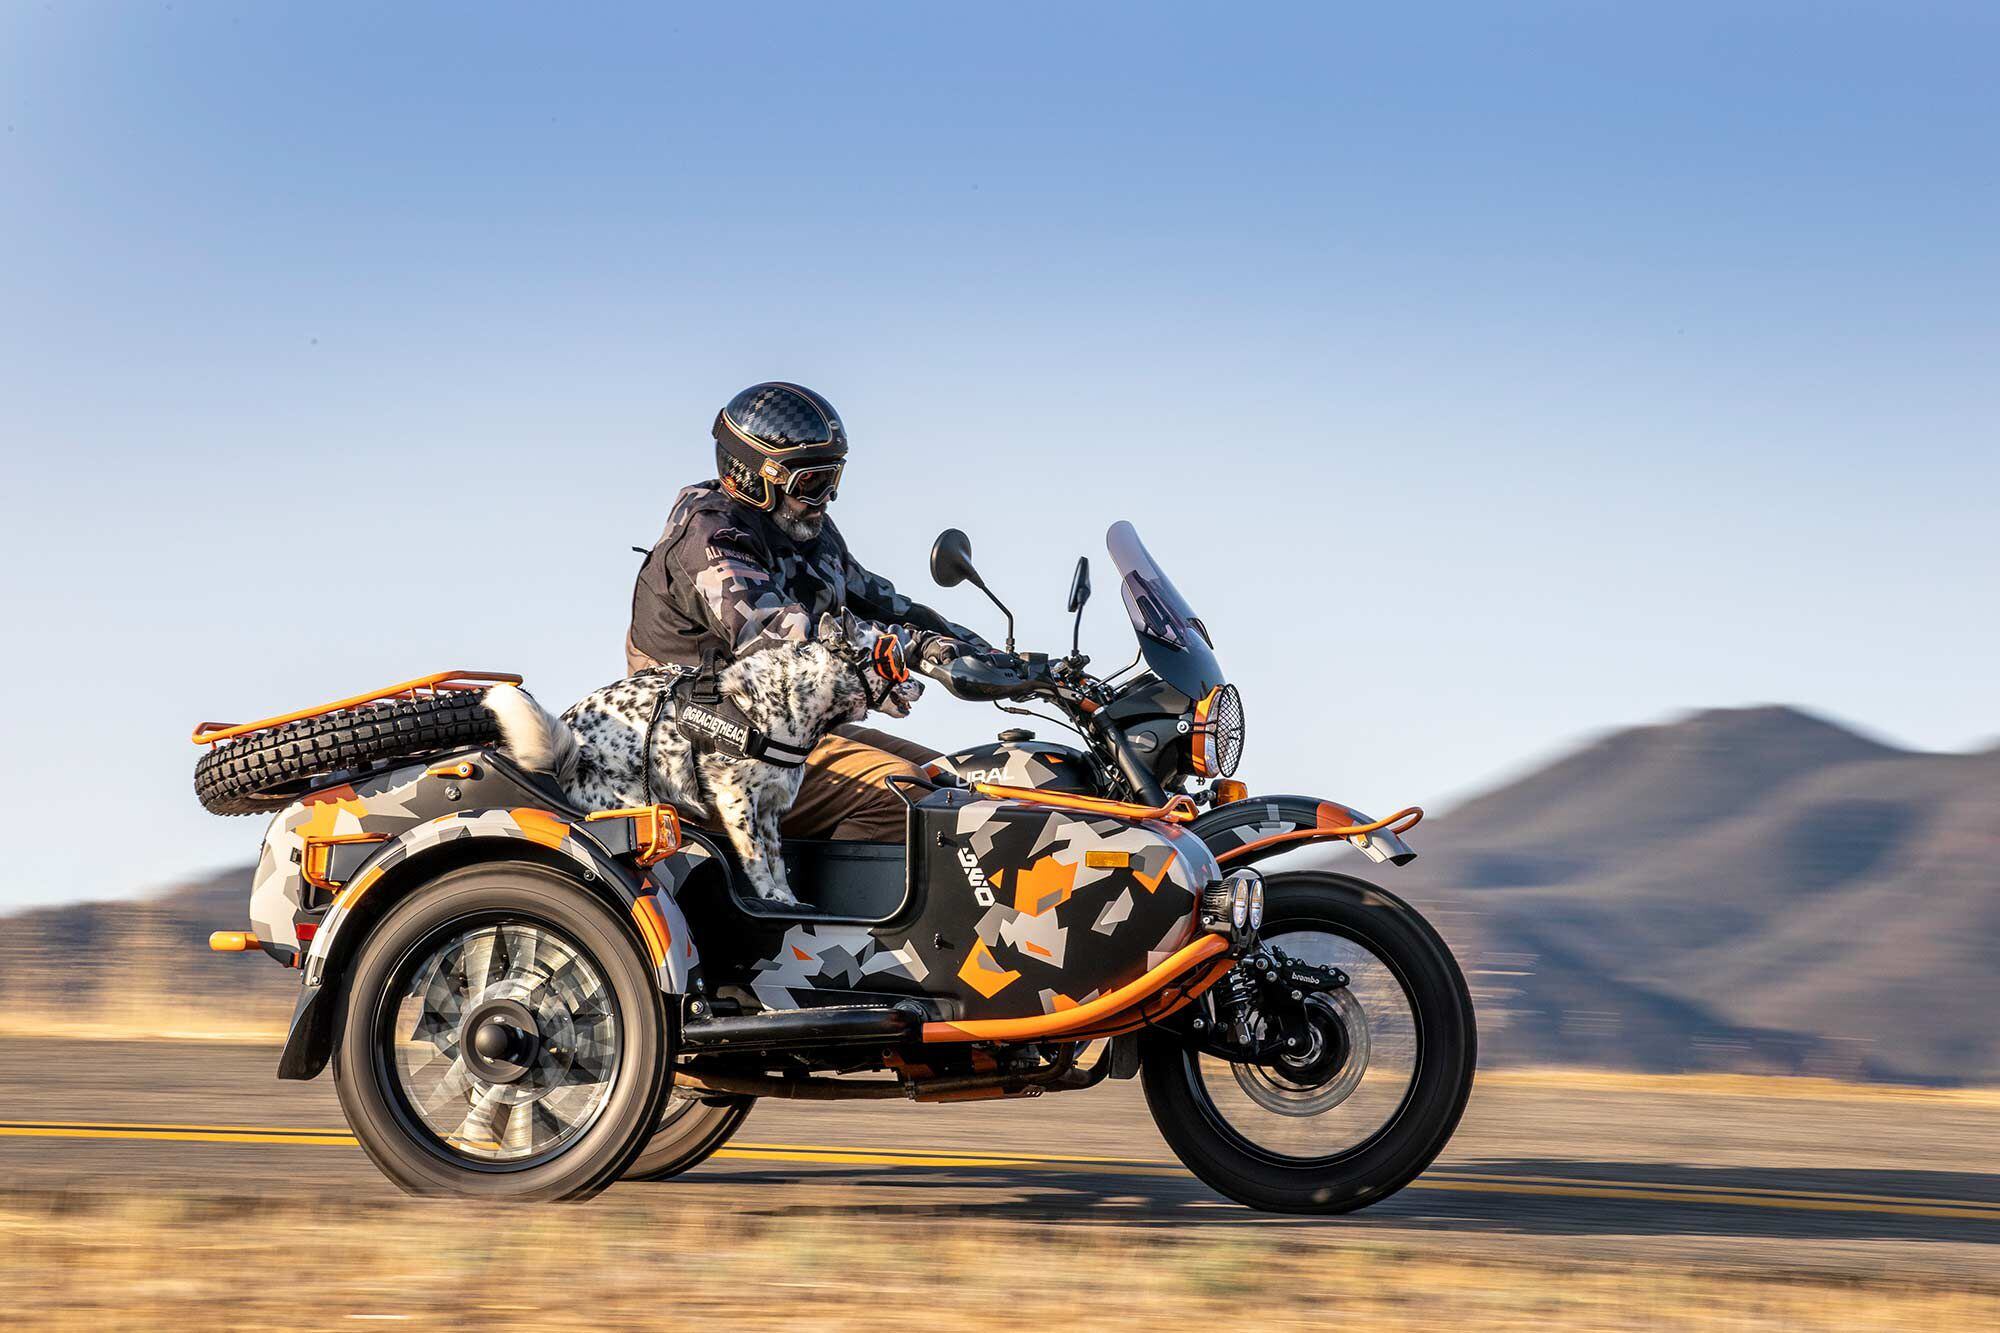 It may not be fast, but the Ural Gear Up Geo sure is fun. And that’s what it’s all about, isn’t it?